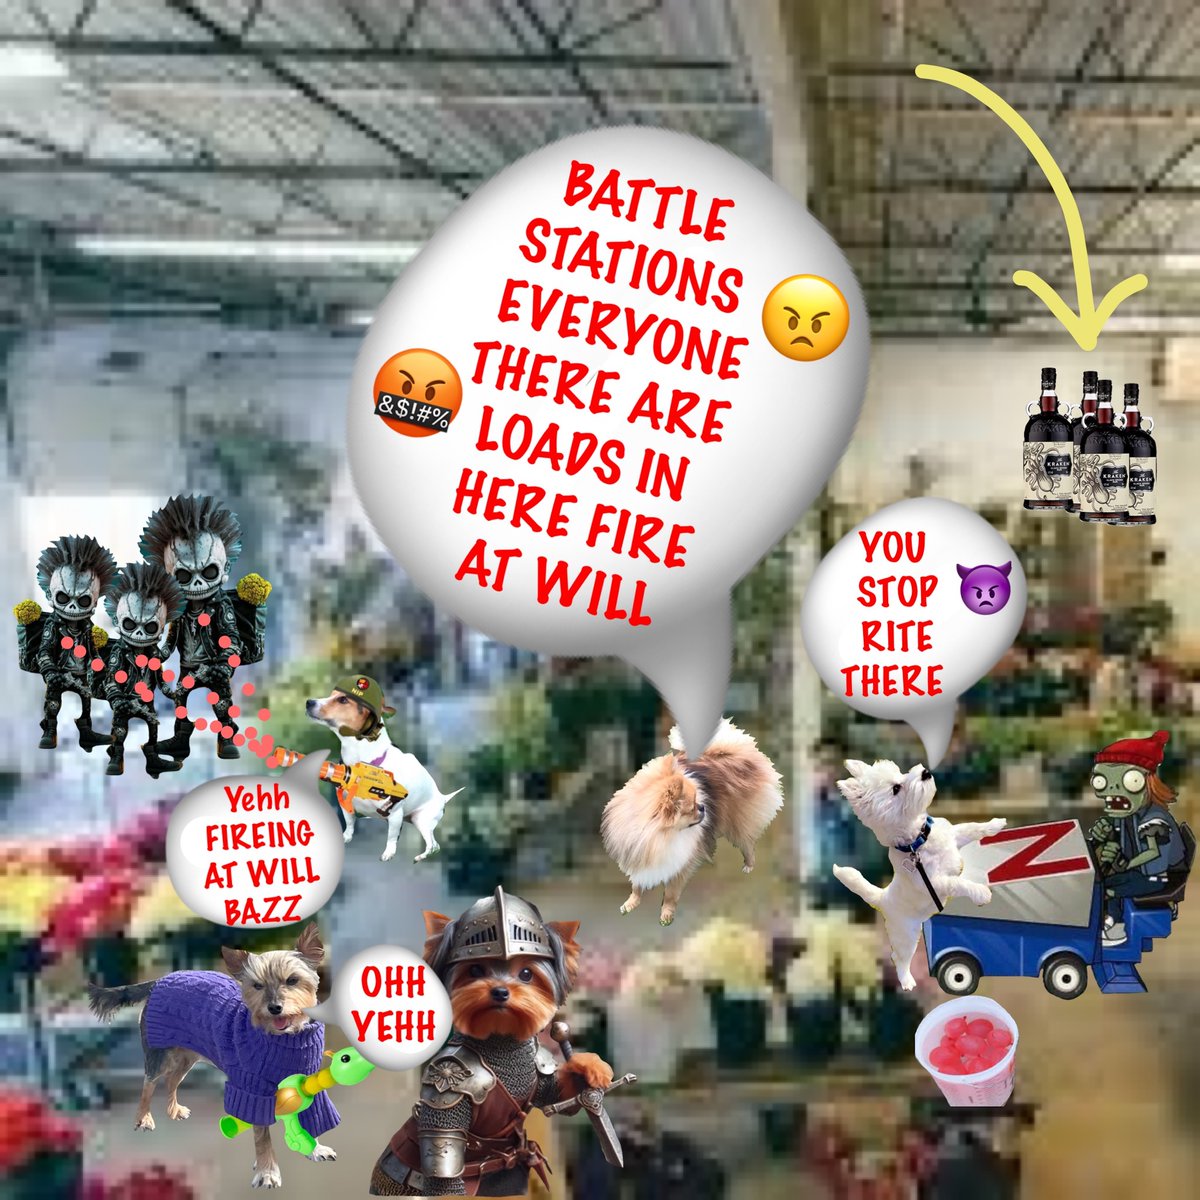 15 #zzst 🌺🪻🌻🌷🌸💐🪷🌹🌼💐🌸🌷🌻🪻🌺
THEY WERE GONNA TIP OVER ALL THE FLOWER BUCKETS!!!!
 GOOD JOB WE GOT HERE IN TIME TO STOP 'EM

OH LOOK..... MORE RUM BOTTLES 😅🤣😂